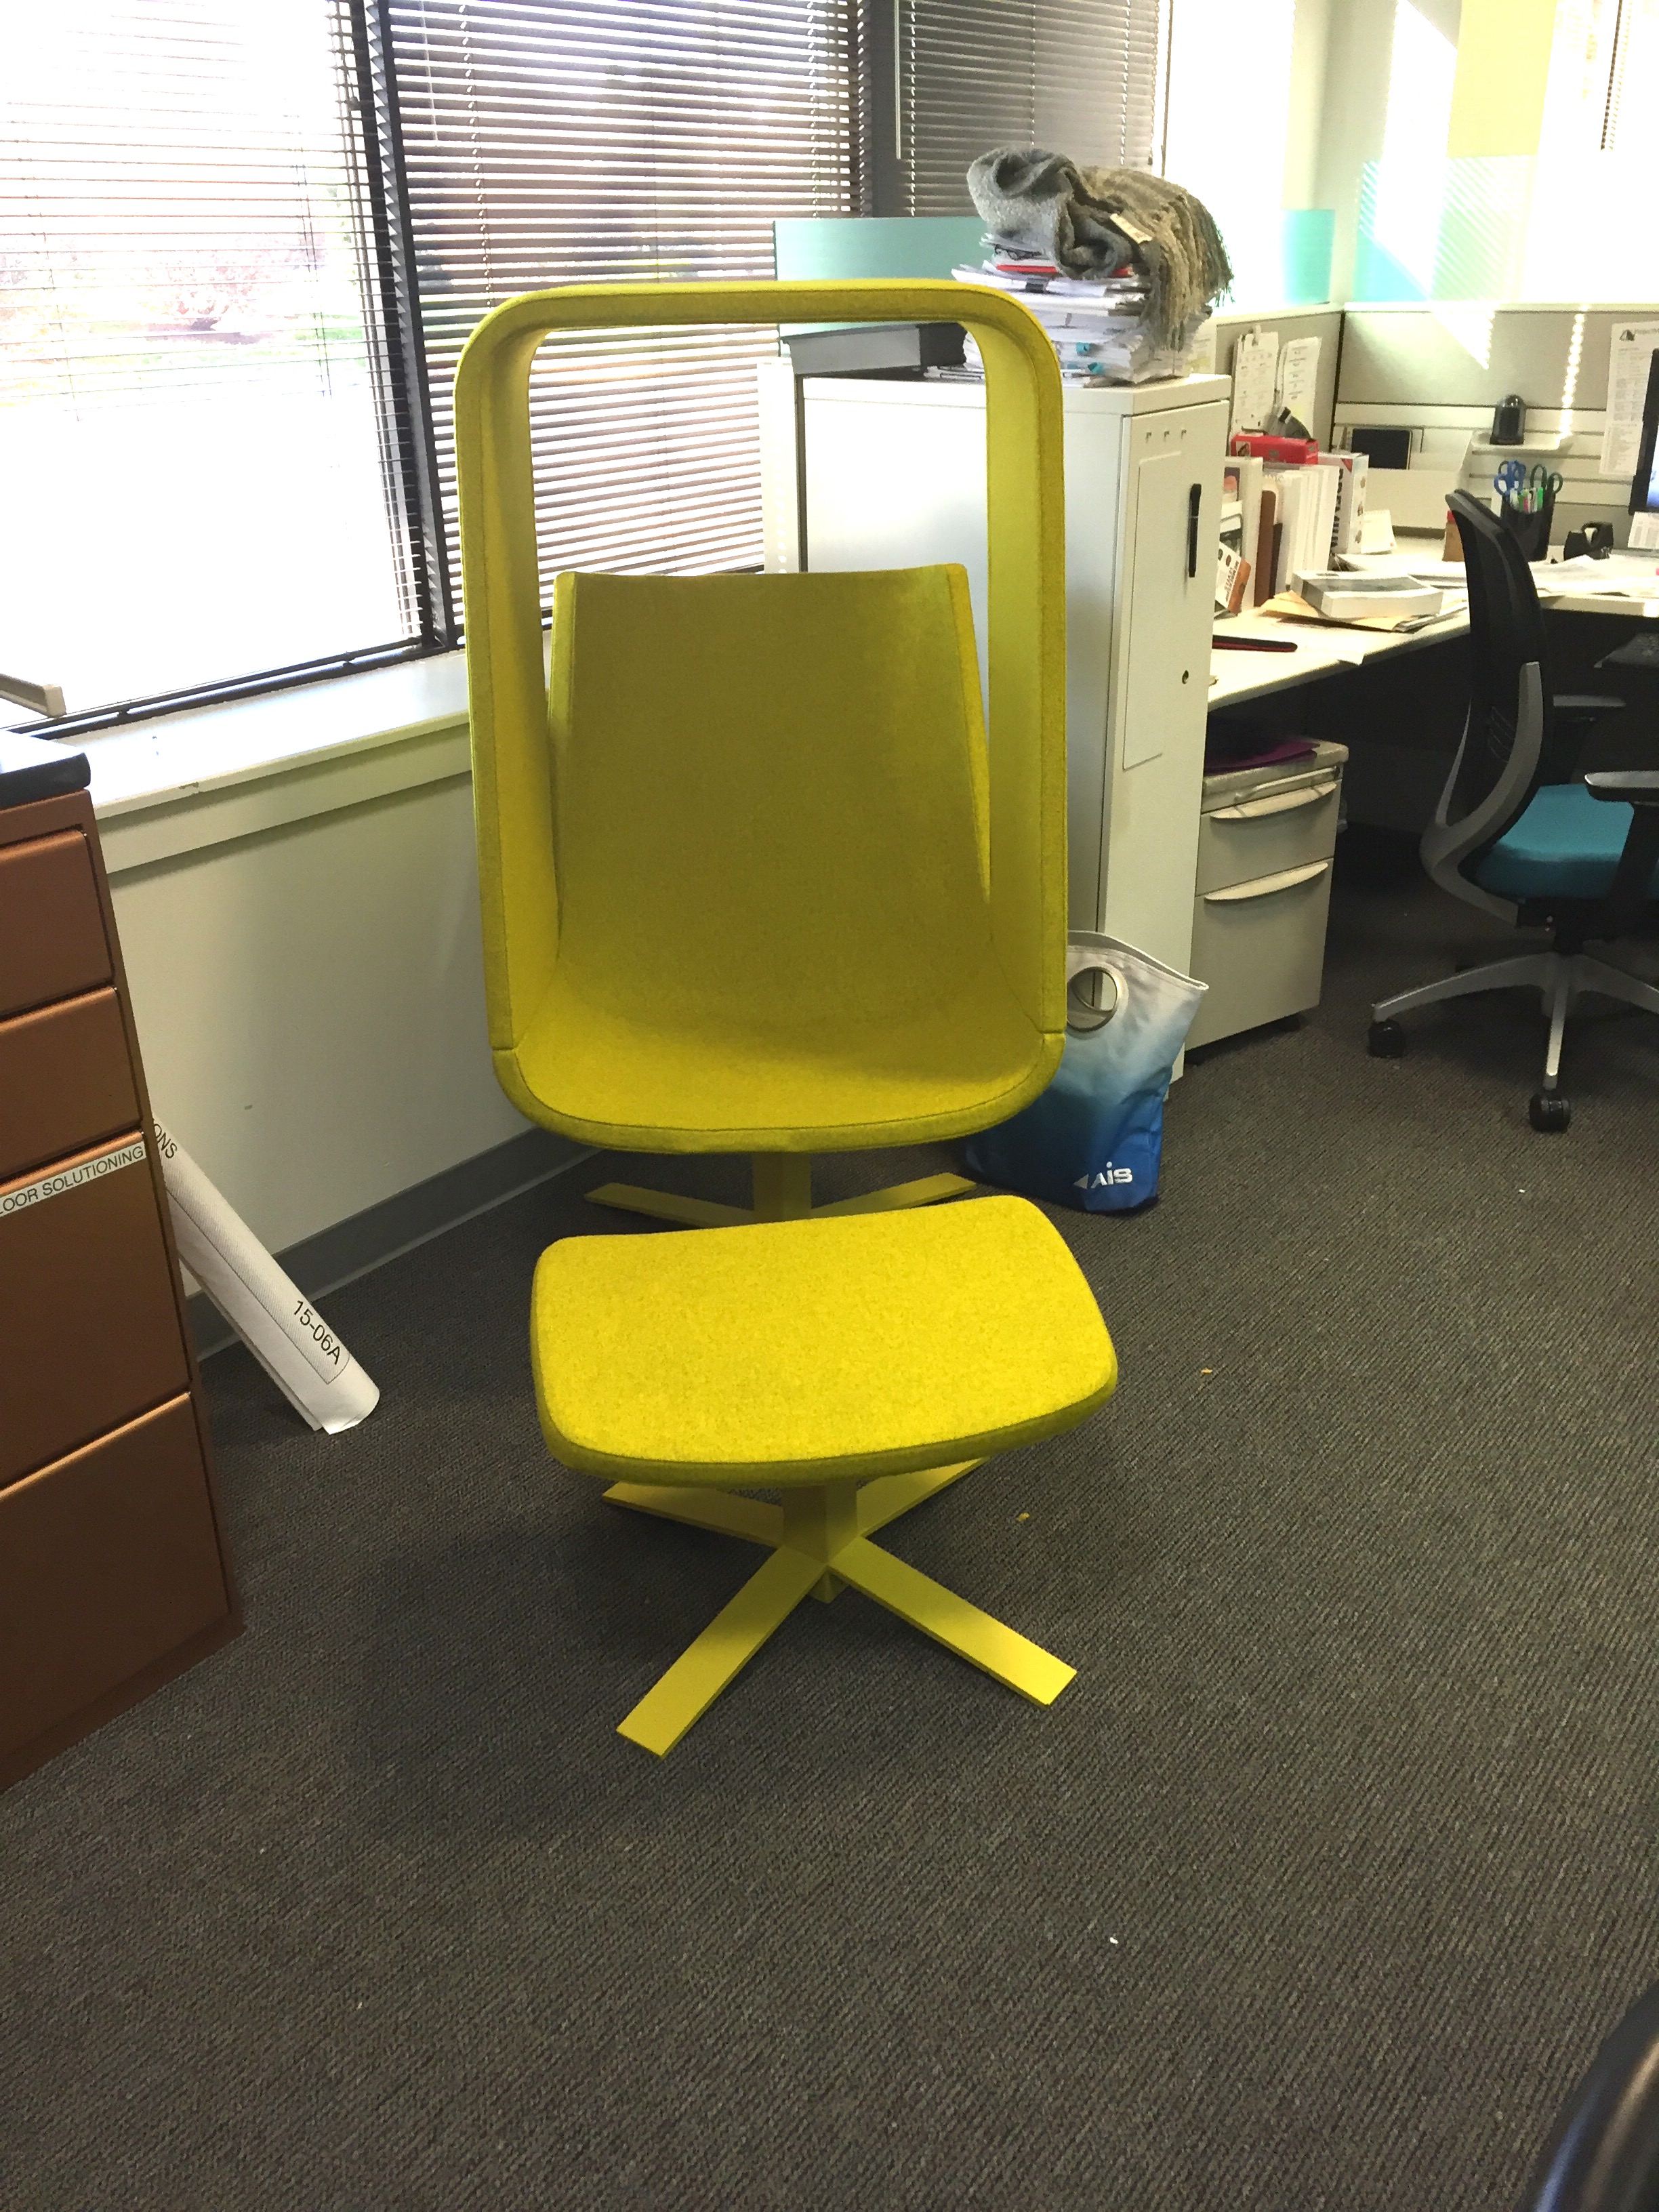 Some fun and interesting office furniture.